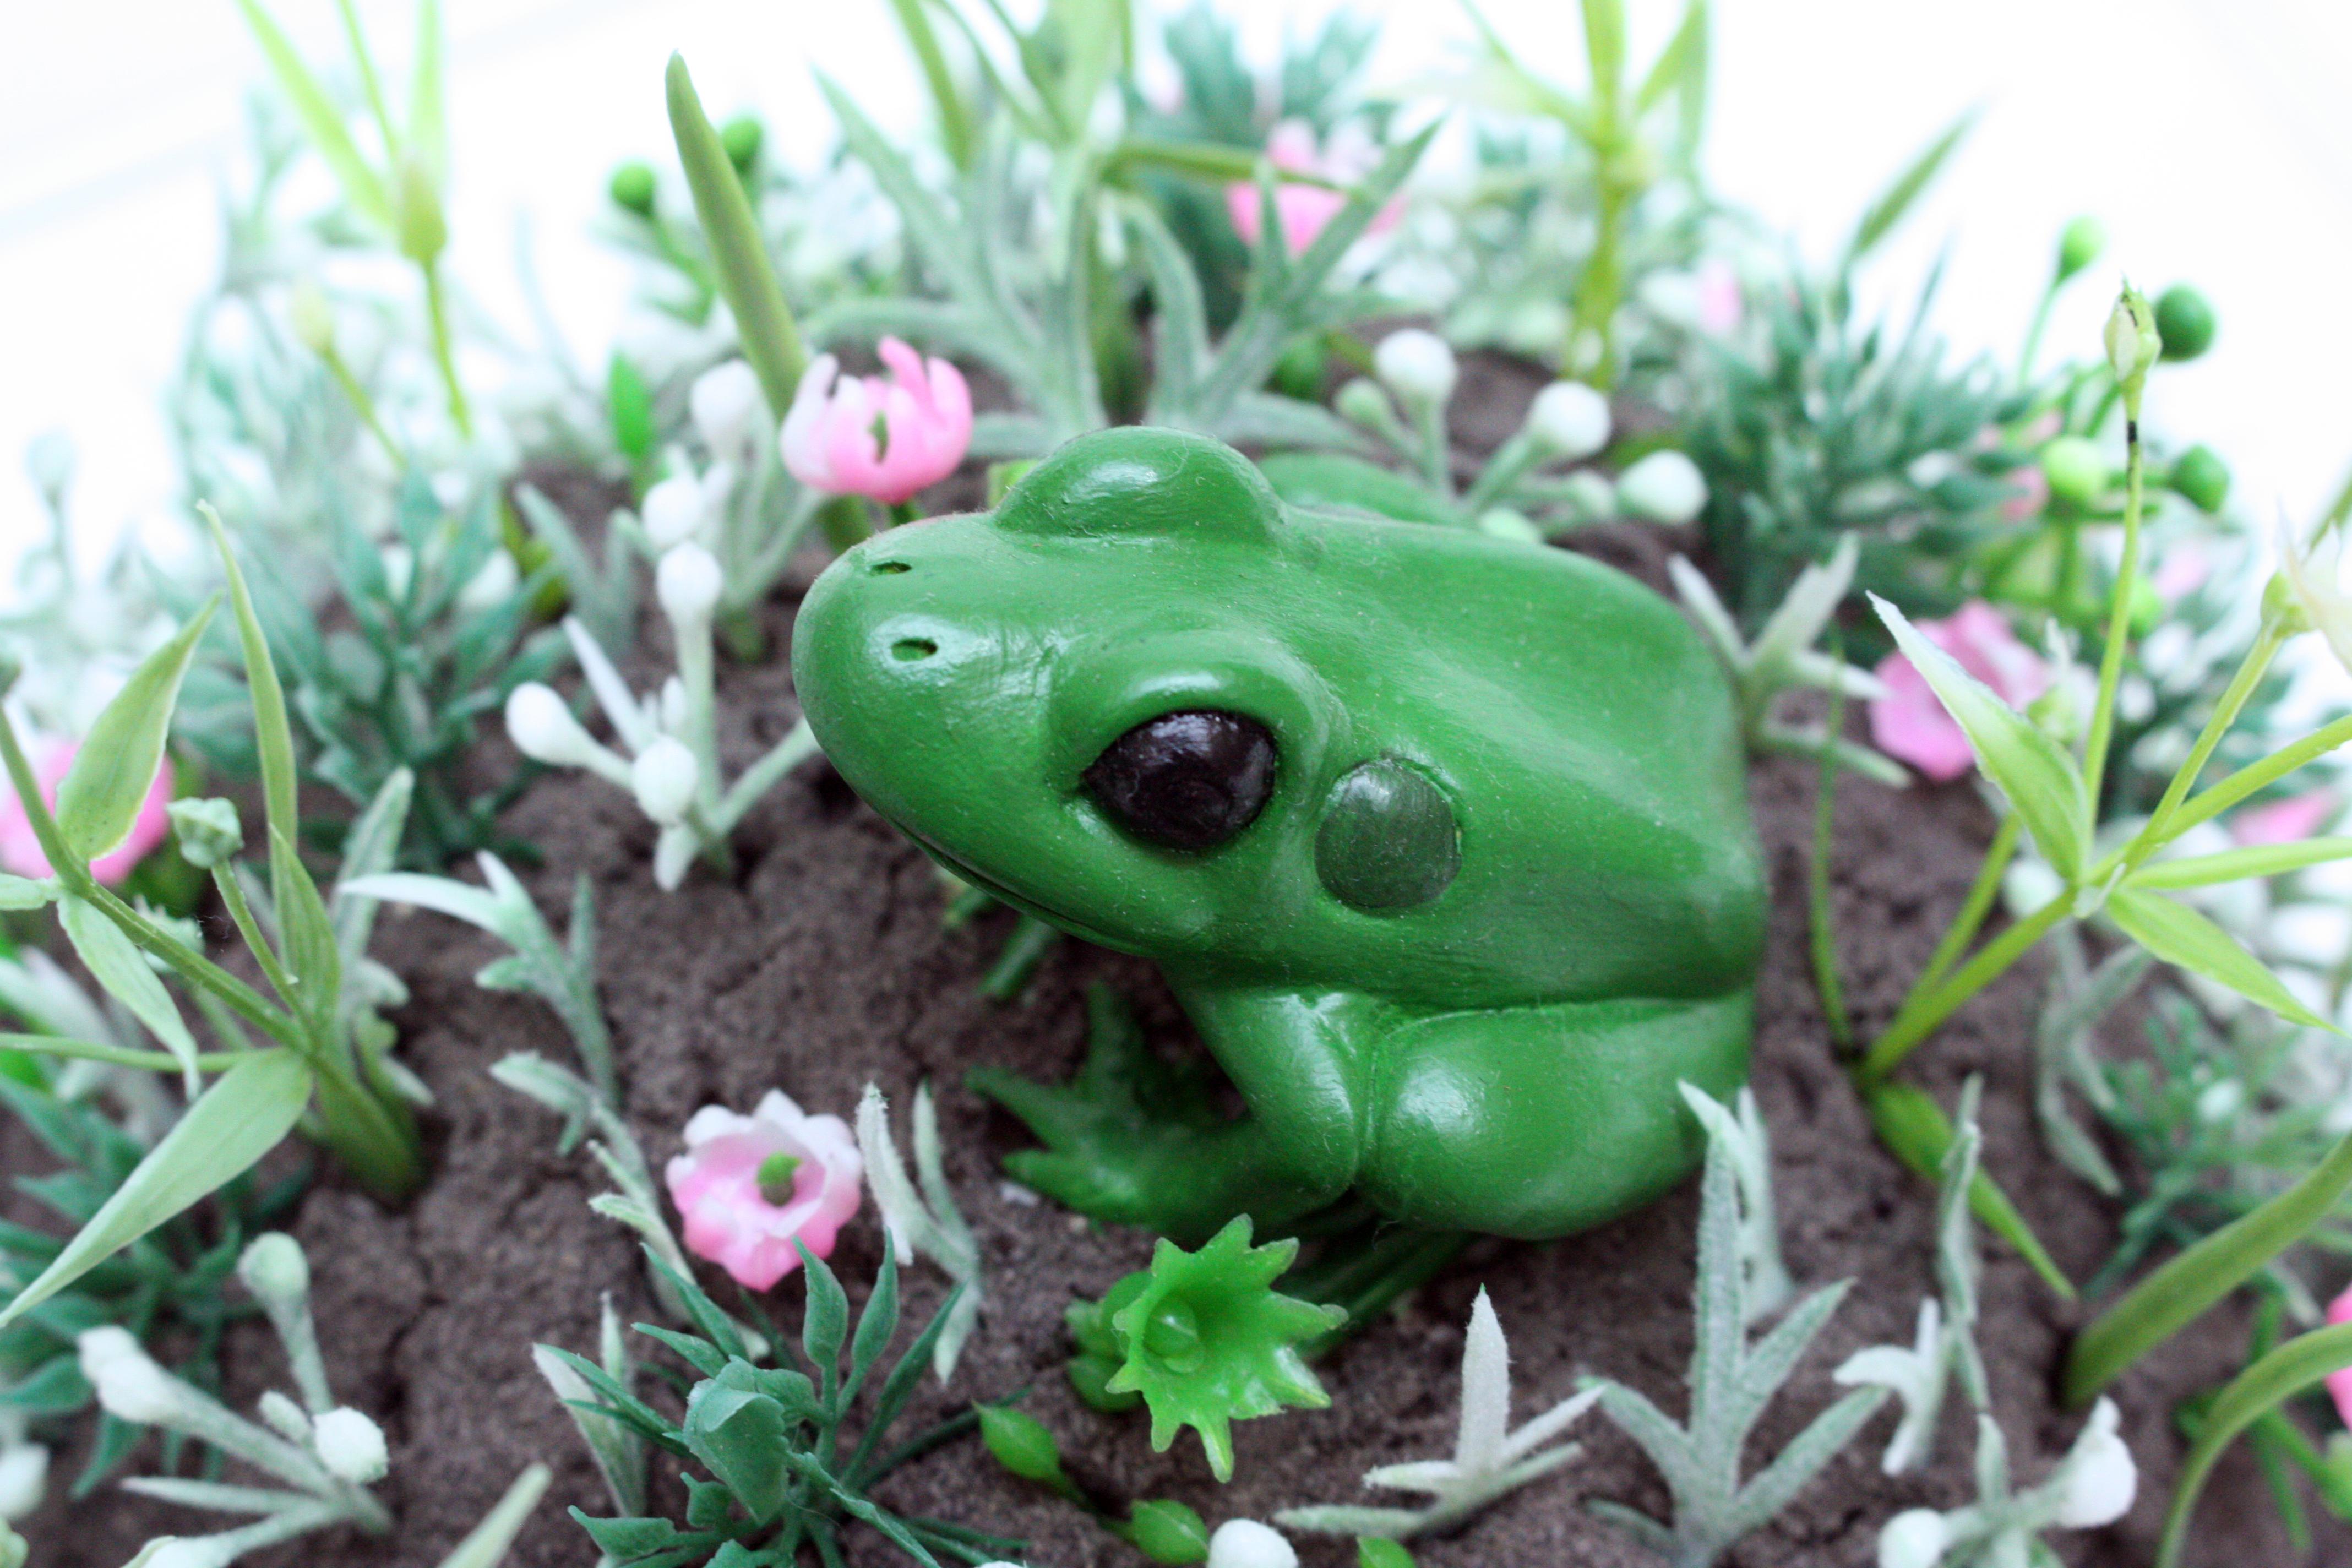 A lone ceramic frog perches atop a dirt mound covered in blooming artificial flowers.  She is a beautiful captive inside her glass aquarium and she is the last of her kind...A creature in need of protection and adoration who raises questions about